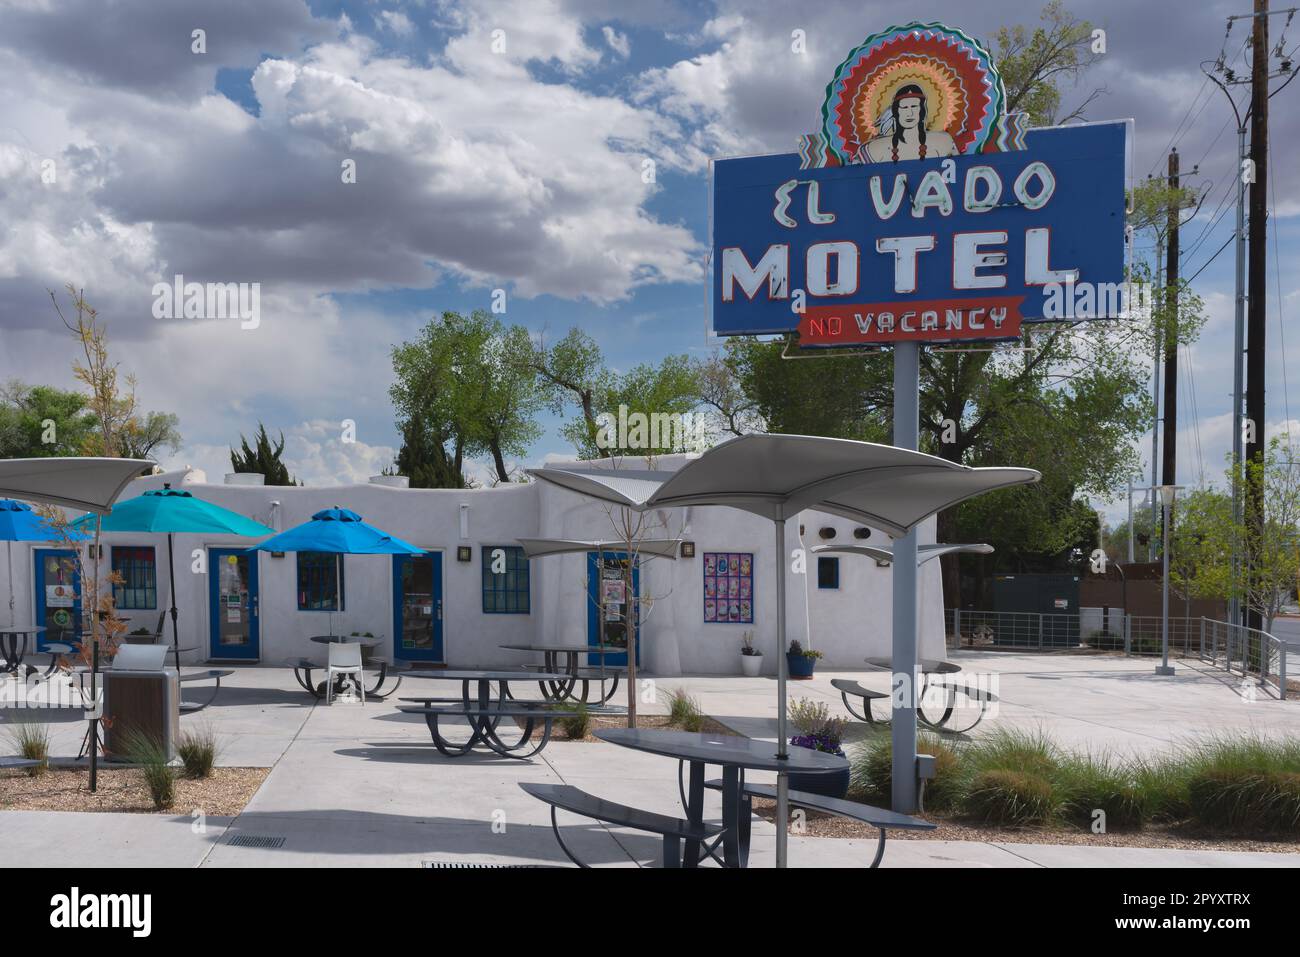 The El Vado Motel and neon sign, a renovated motor court on Route 66 transformed into multi-use complex, motel and small businesses, Albuquerque NM. Stock Photo